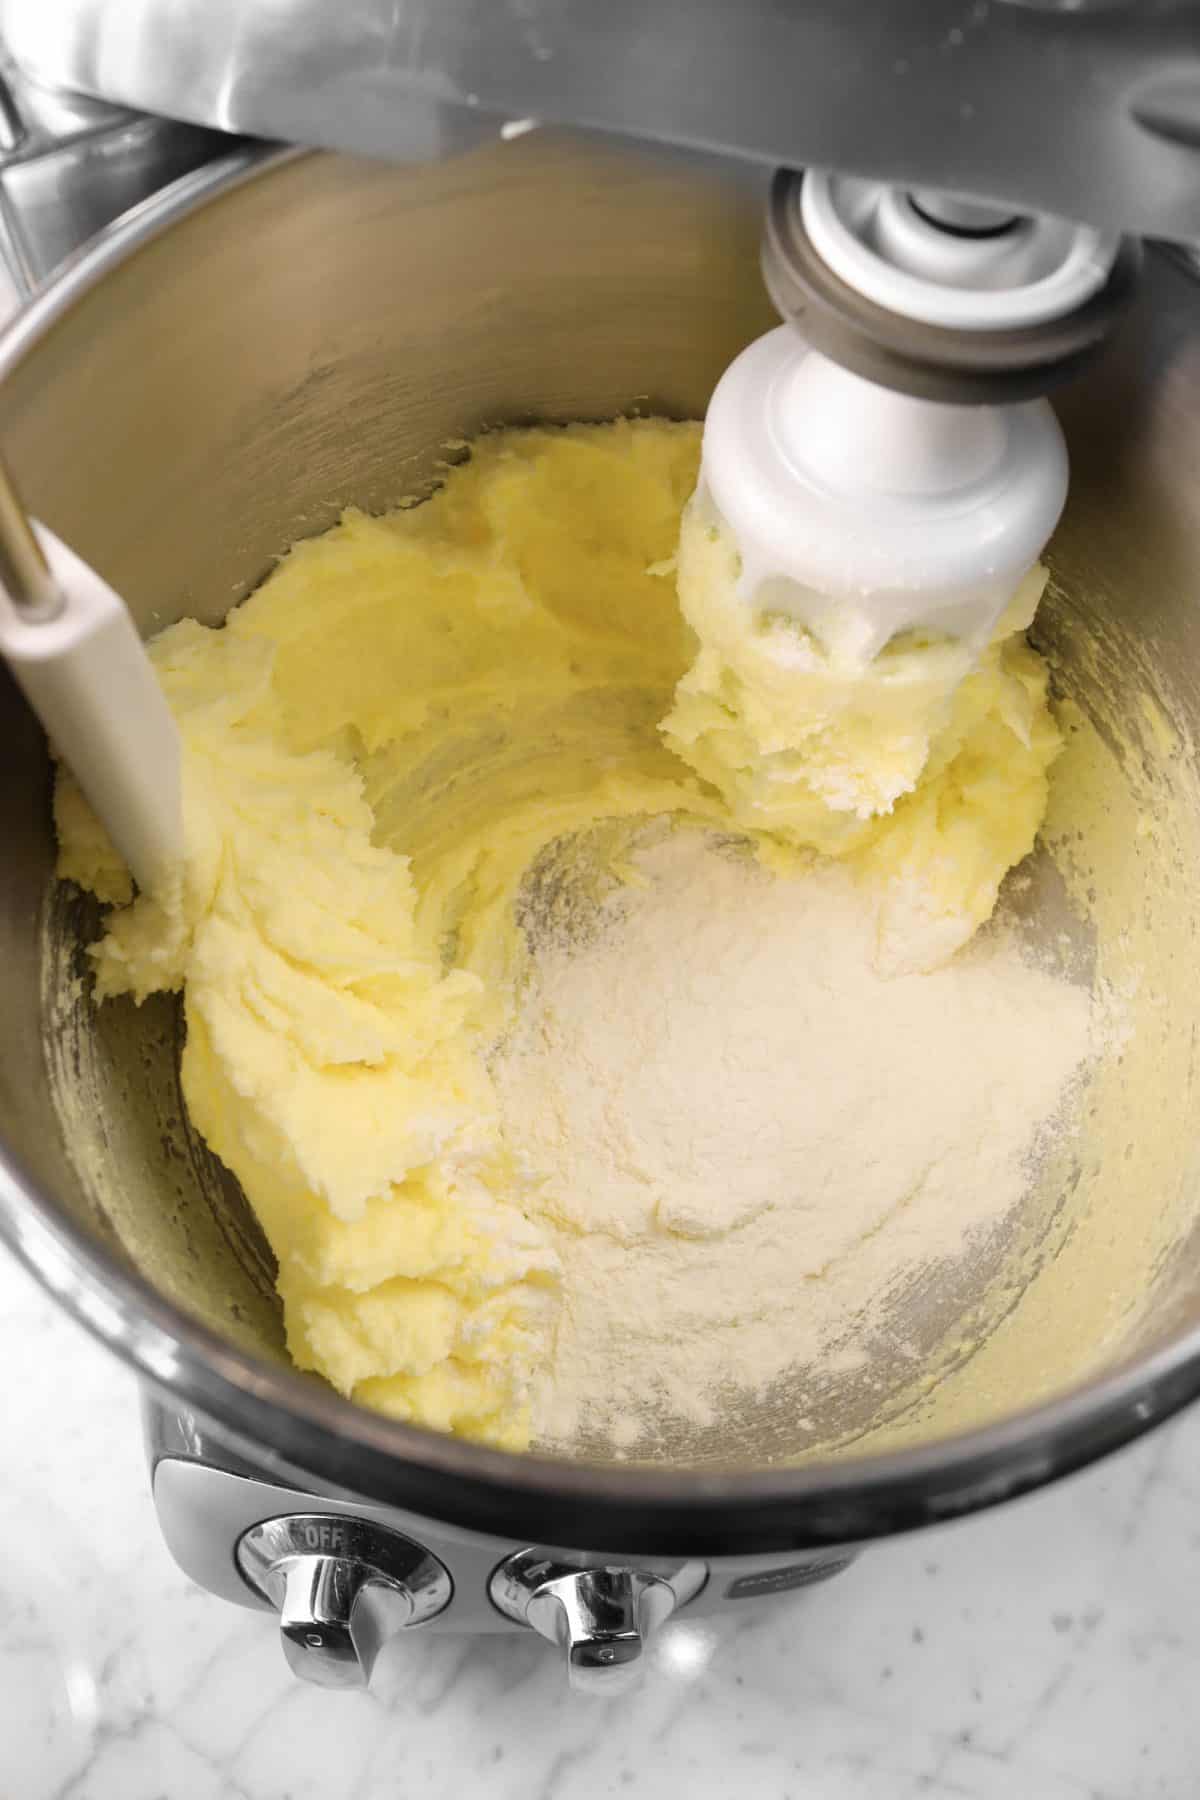 flour addd to butter and sugar mixture